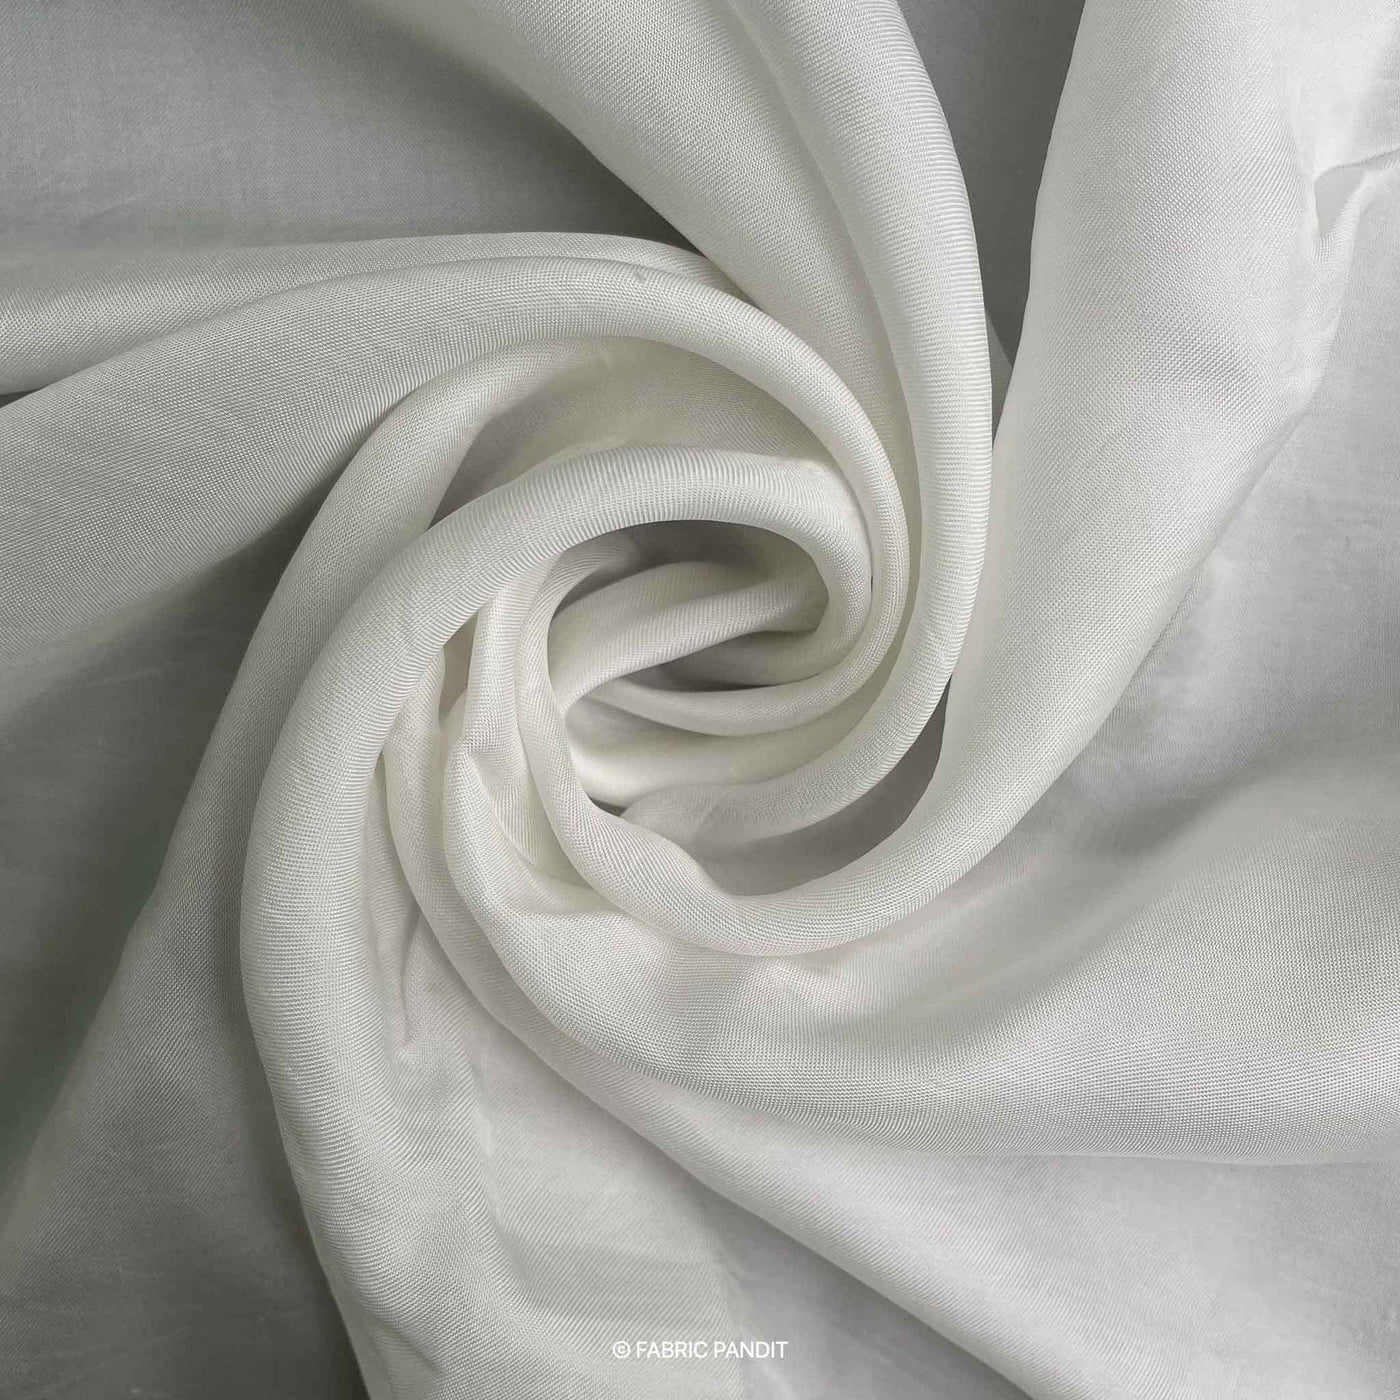 Fabric Pandit Fabric White Dyeable Pure Bemberg Satin Plain Fabric (Width 44 inches, 60 Gms)